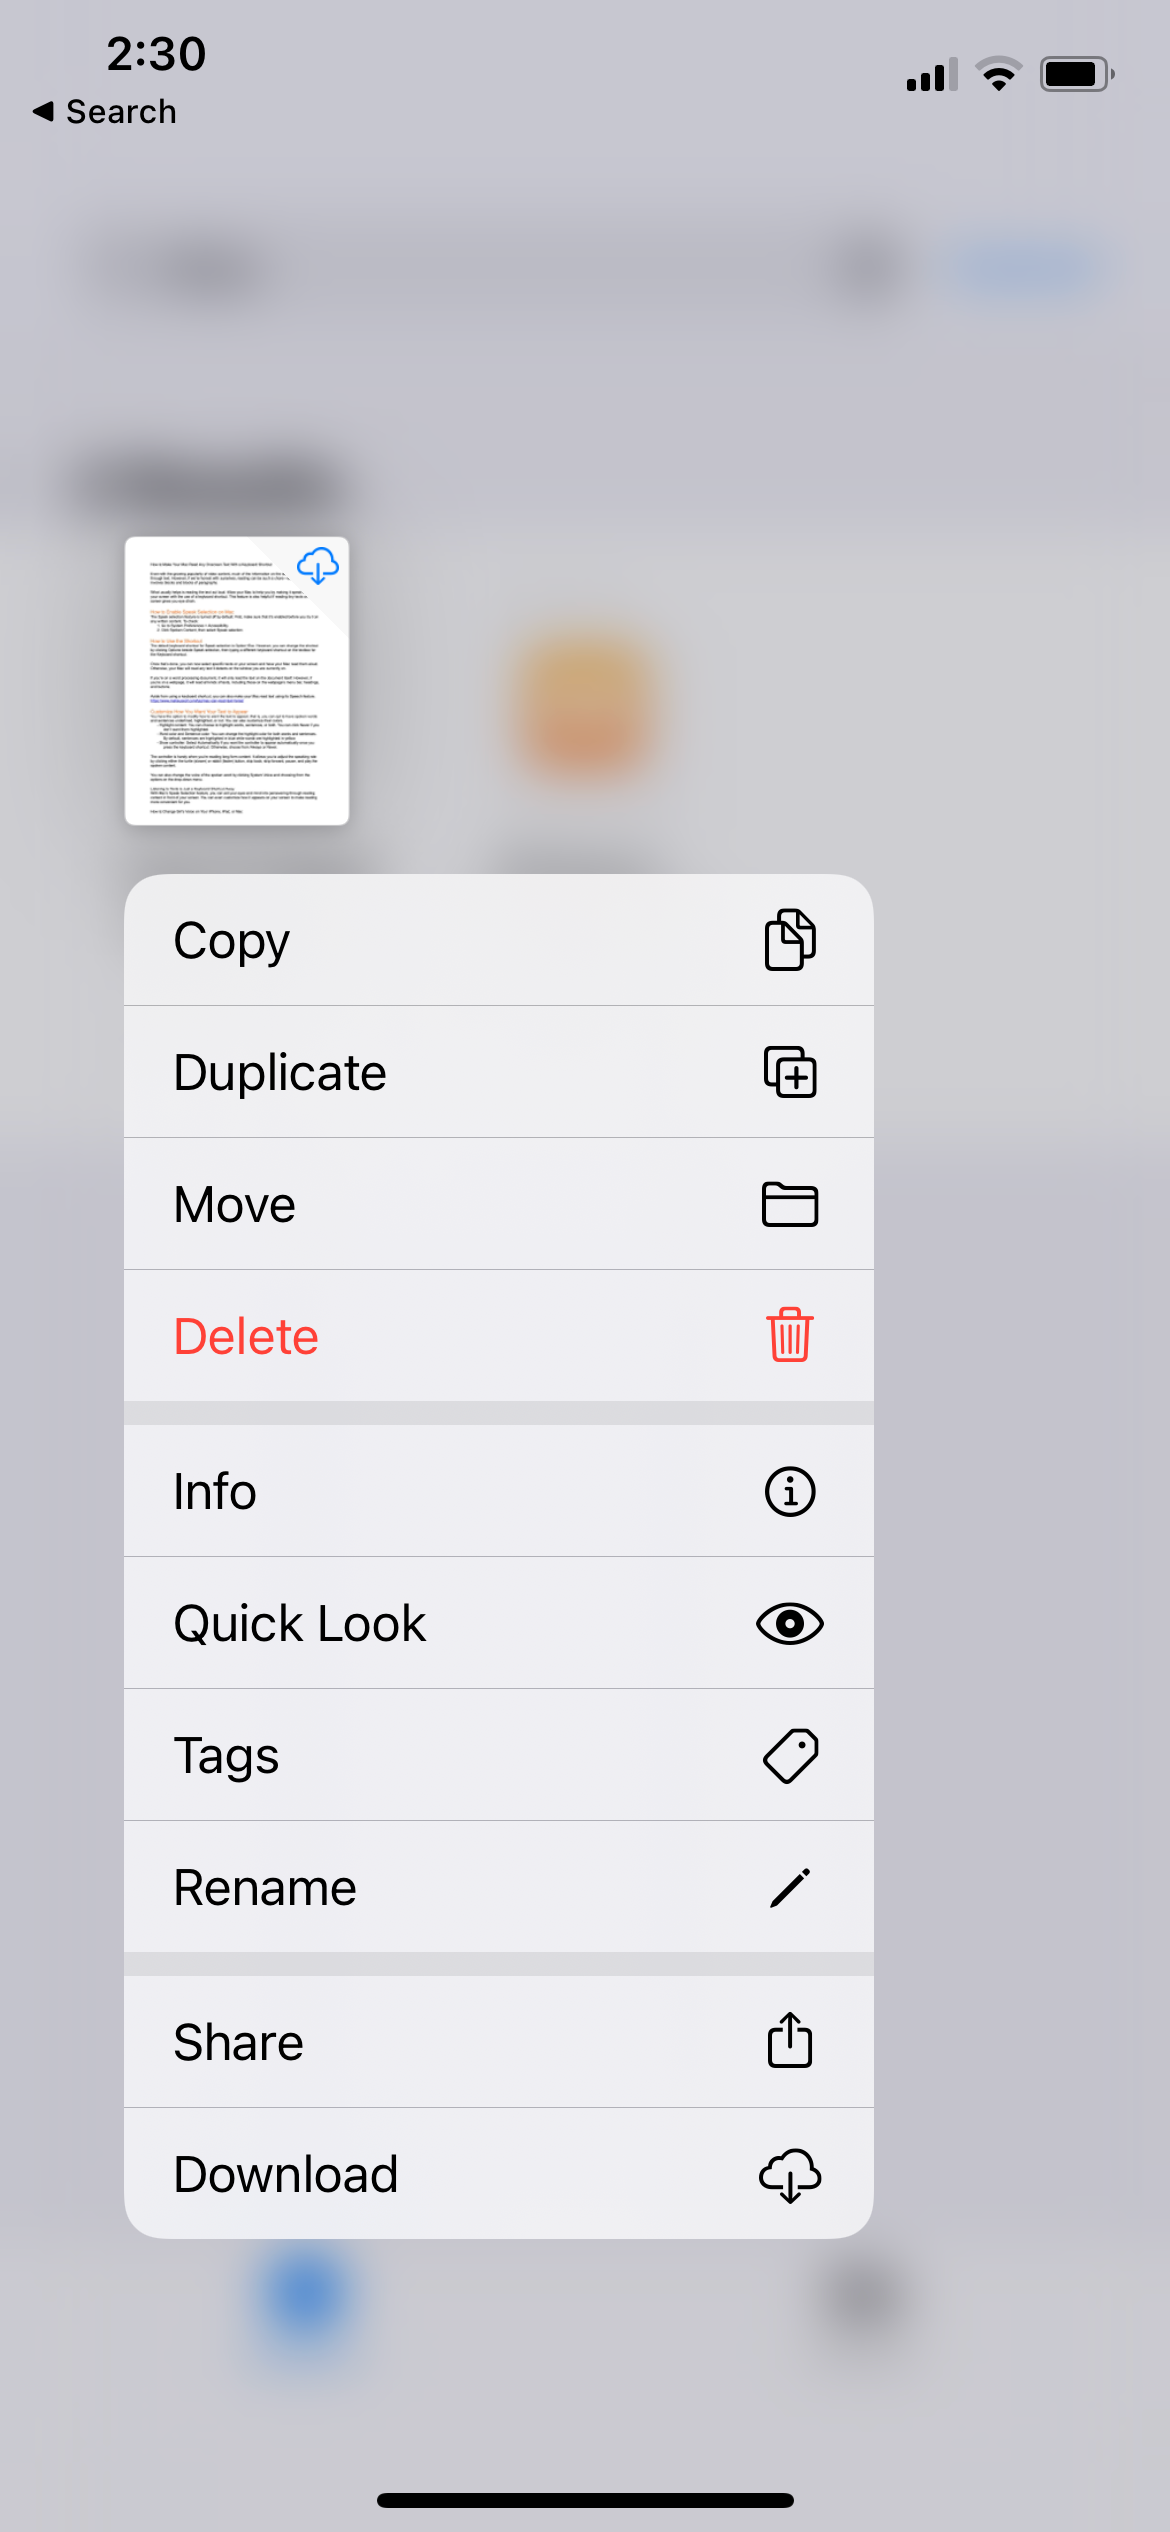 Pop-up Menu Showing Share After Choosing a File on iCloud